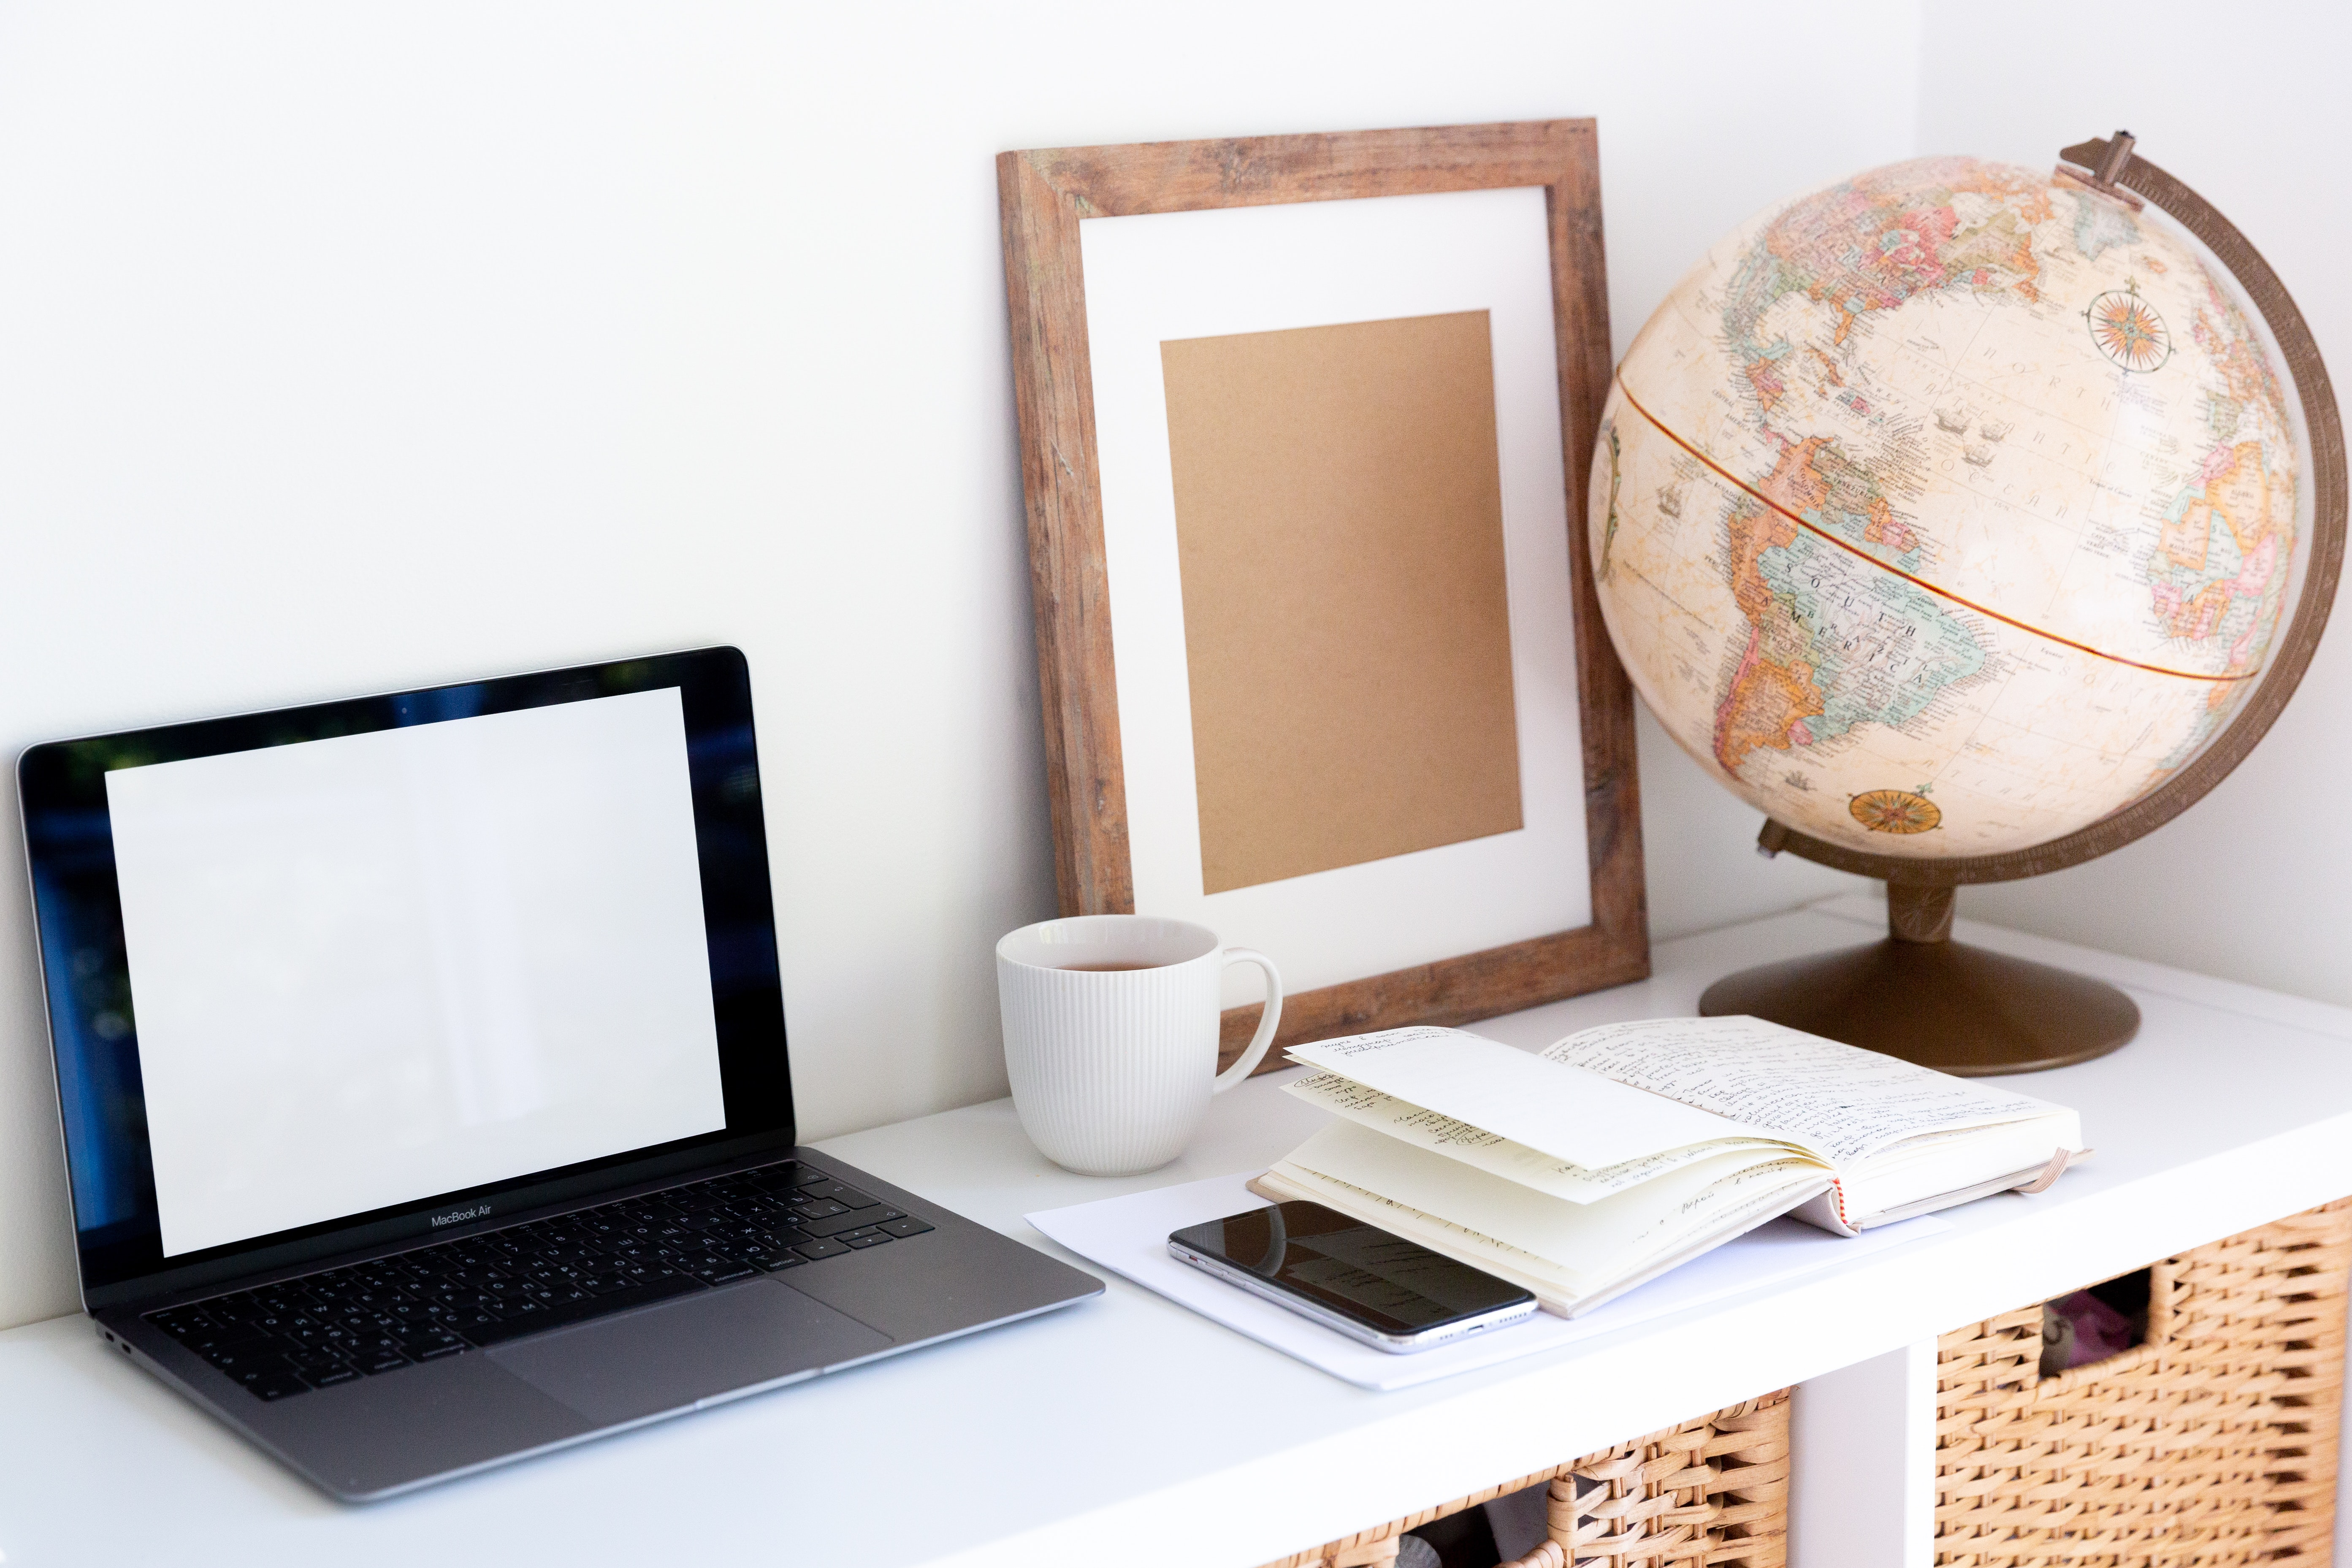 An open laptop, empty picture frame, book, phone, mug, and globe on a white shelf.